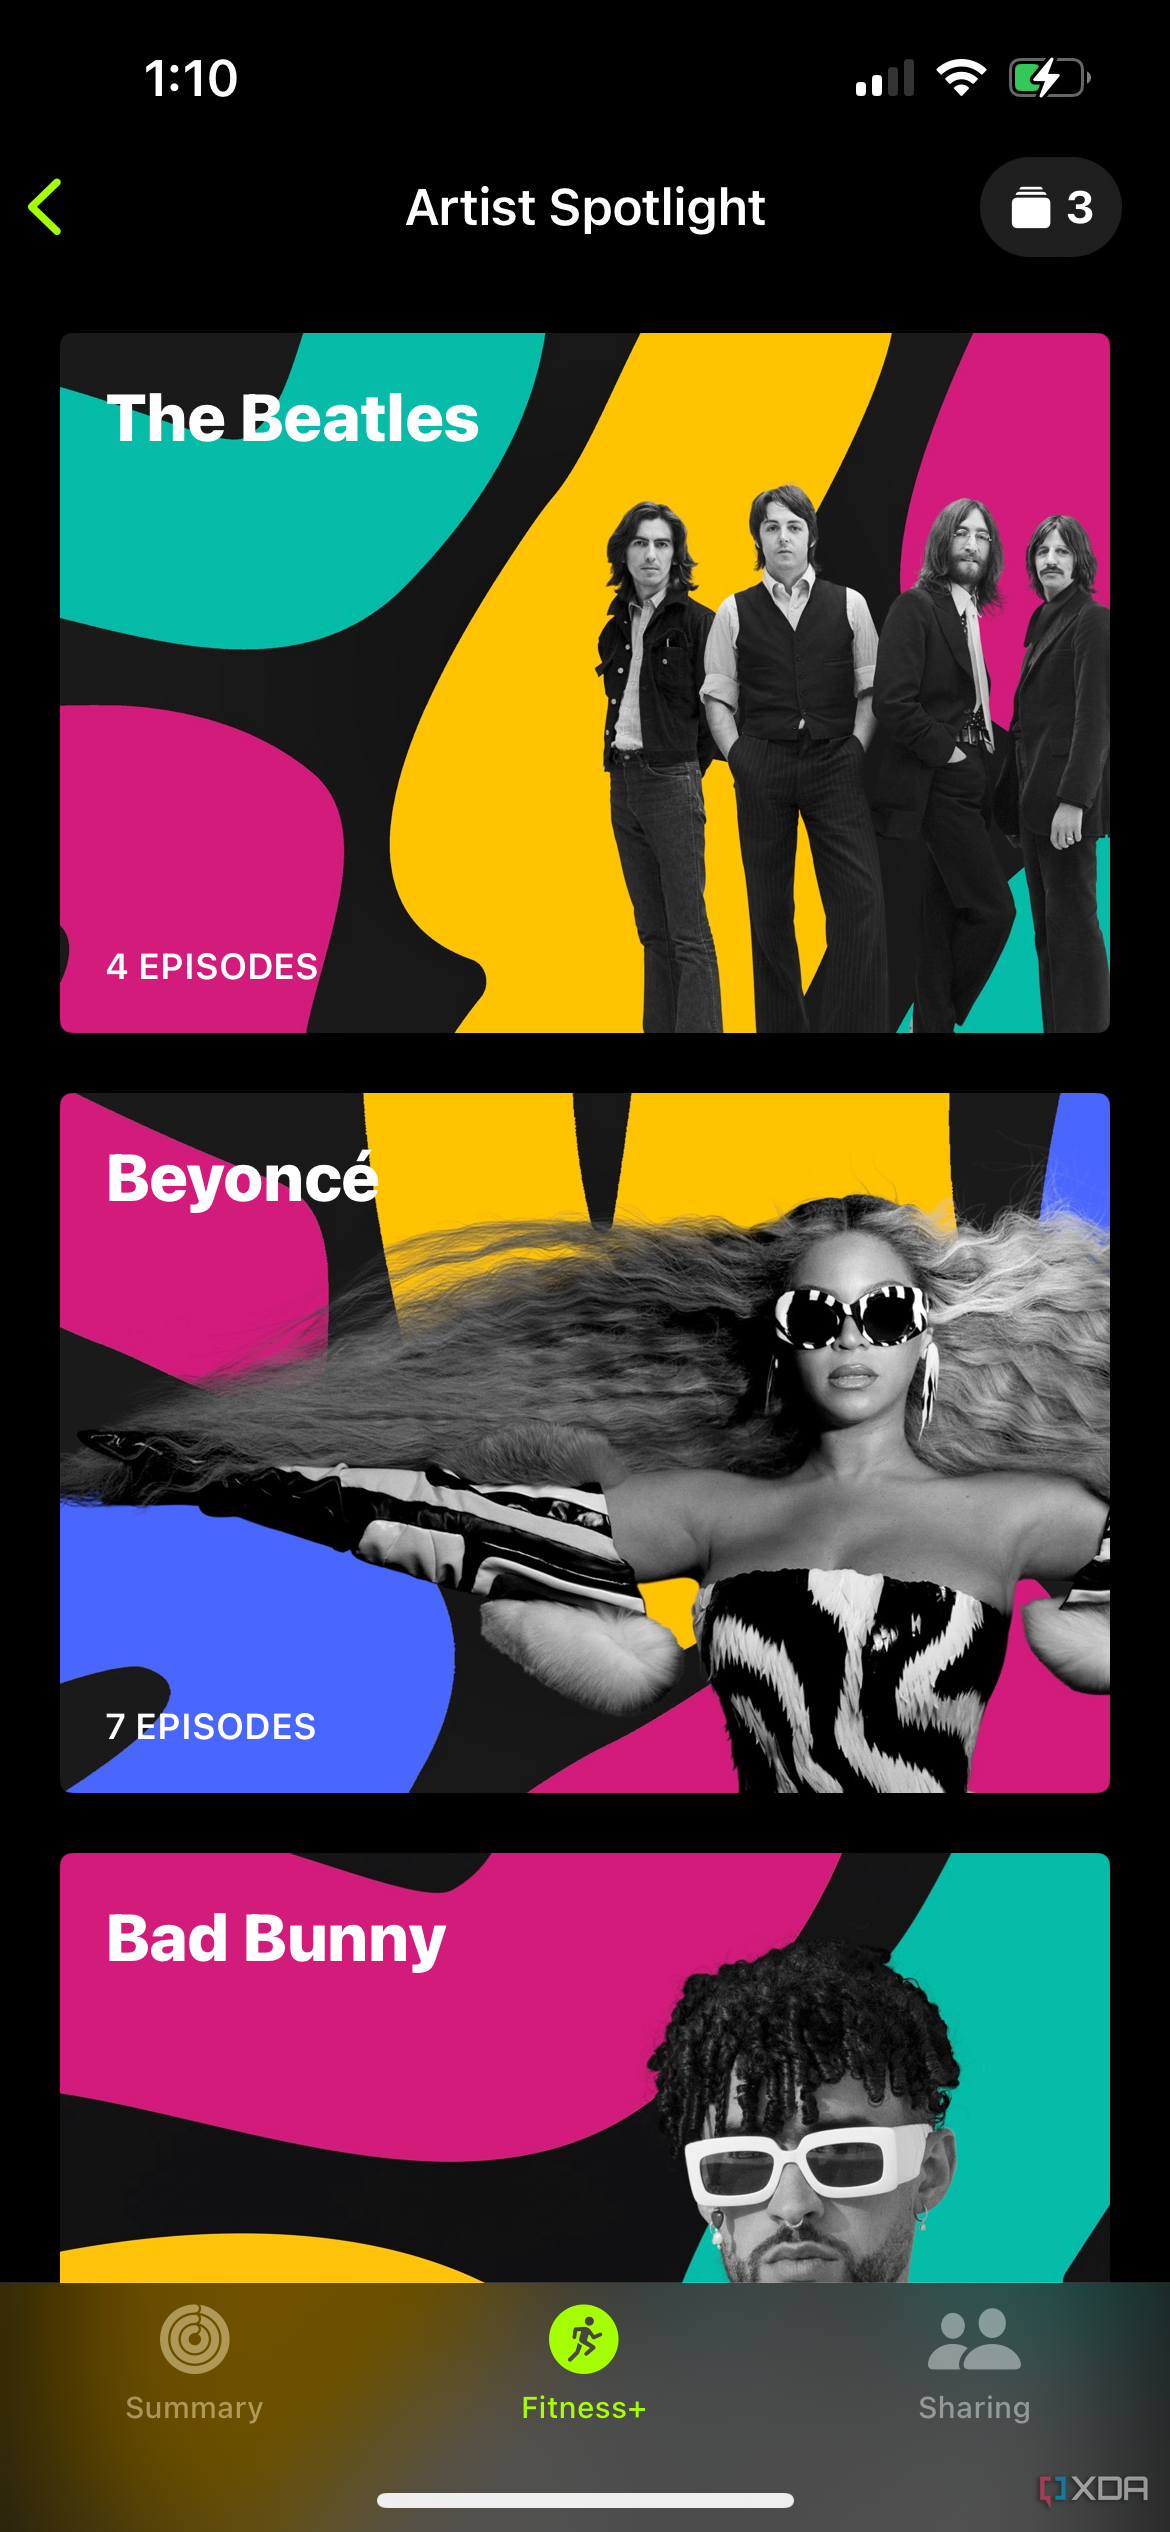 Artist Spotlight page showing The Beatles, Beyonce, and Bad Bunny in the Apple Fitness Plus section of the Apple Fitness app